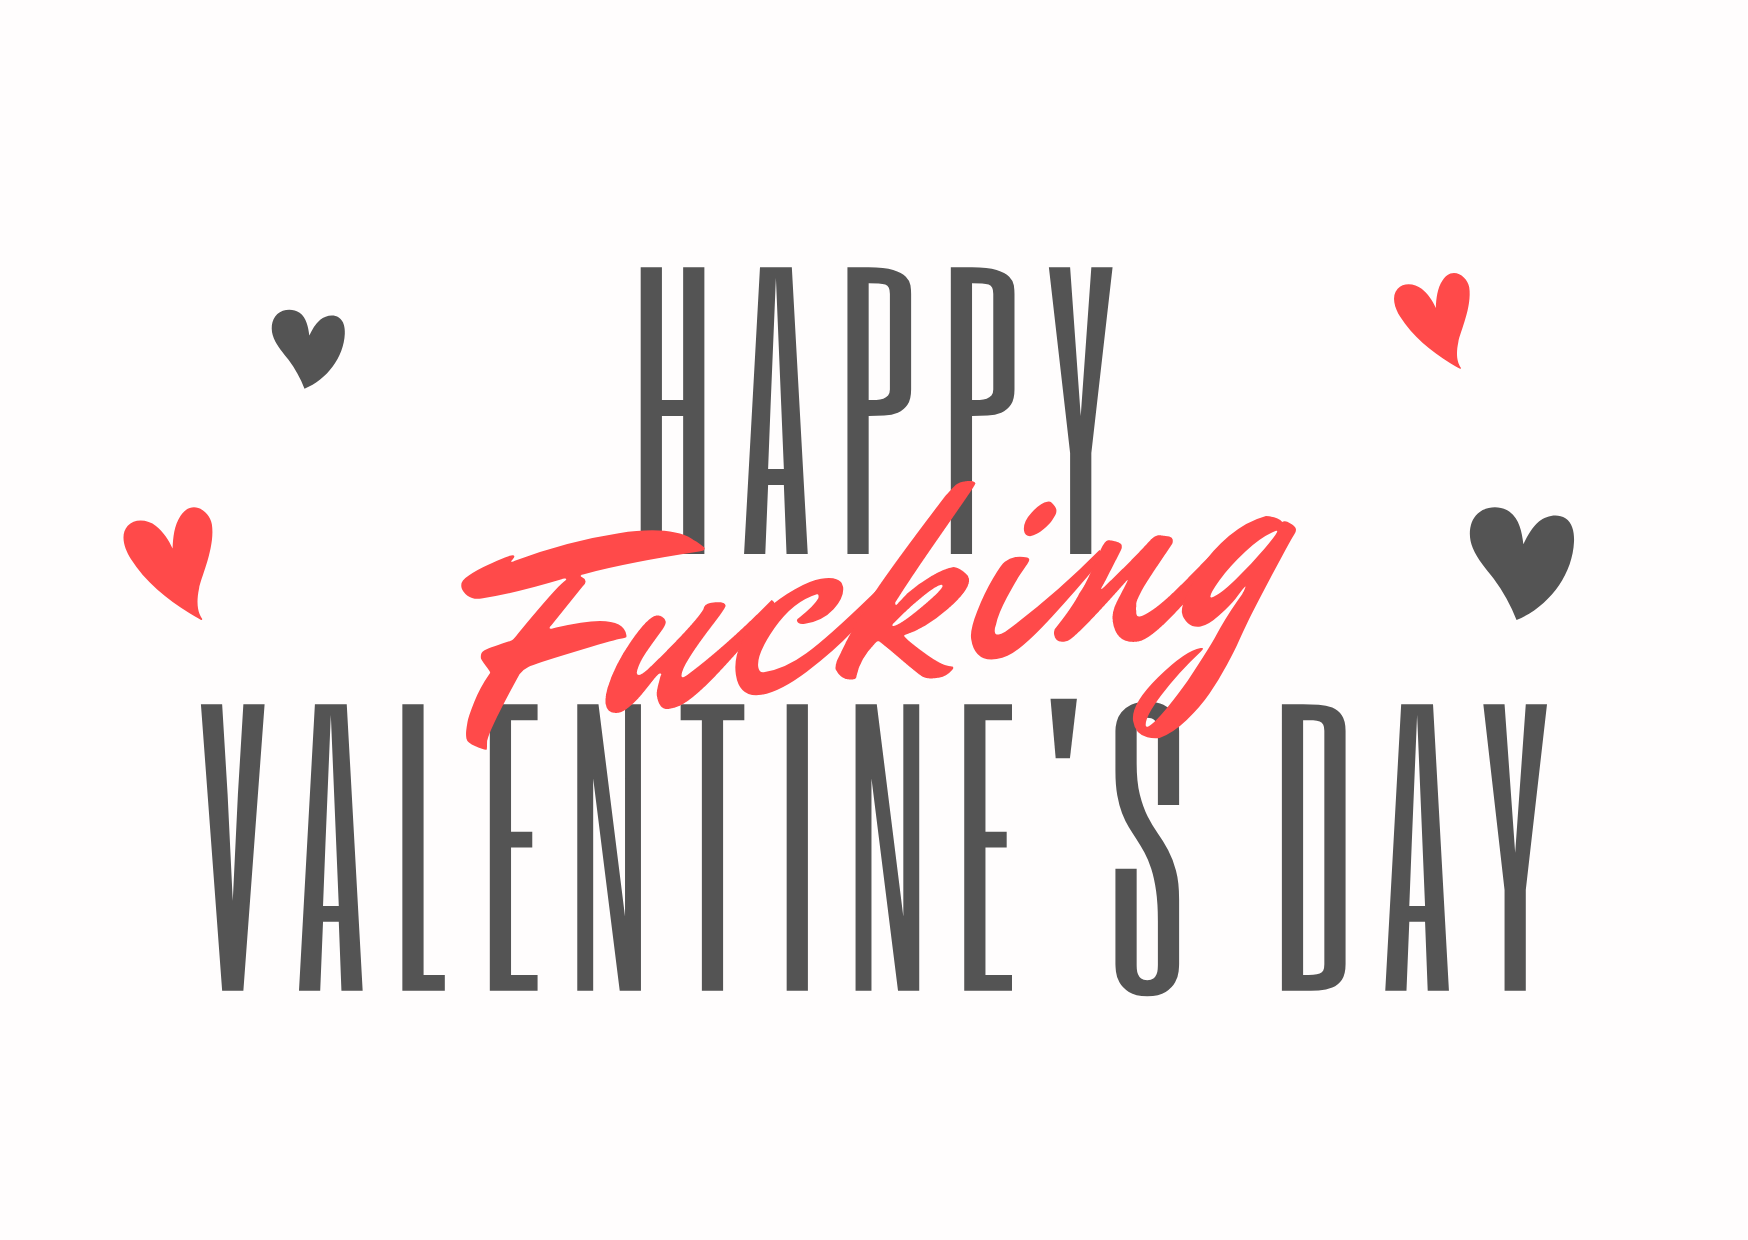 White seed paper greeting card saying "Happy Fucking Valentine's Day"